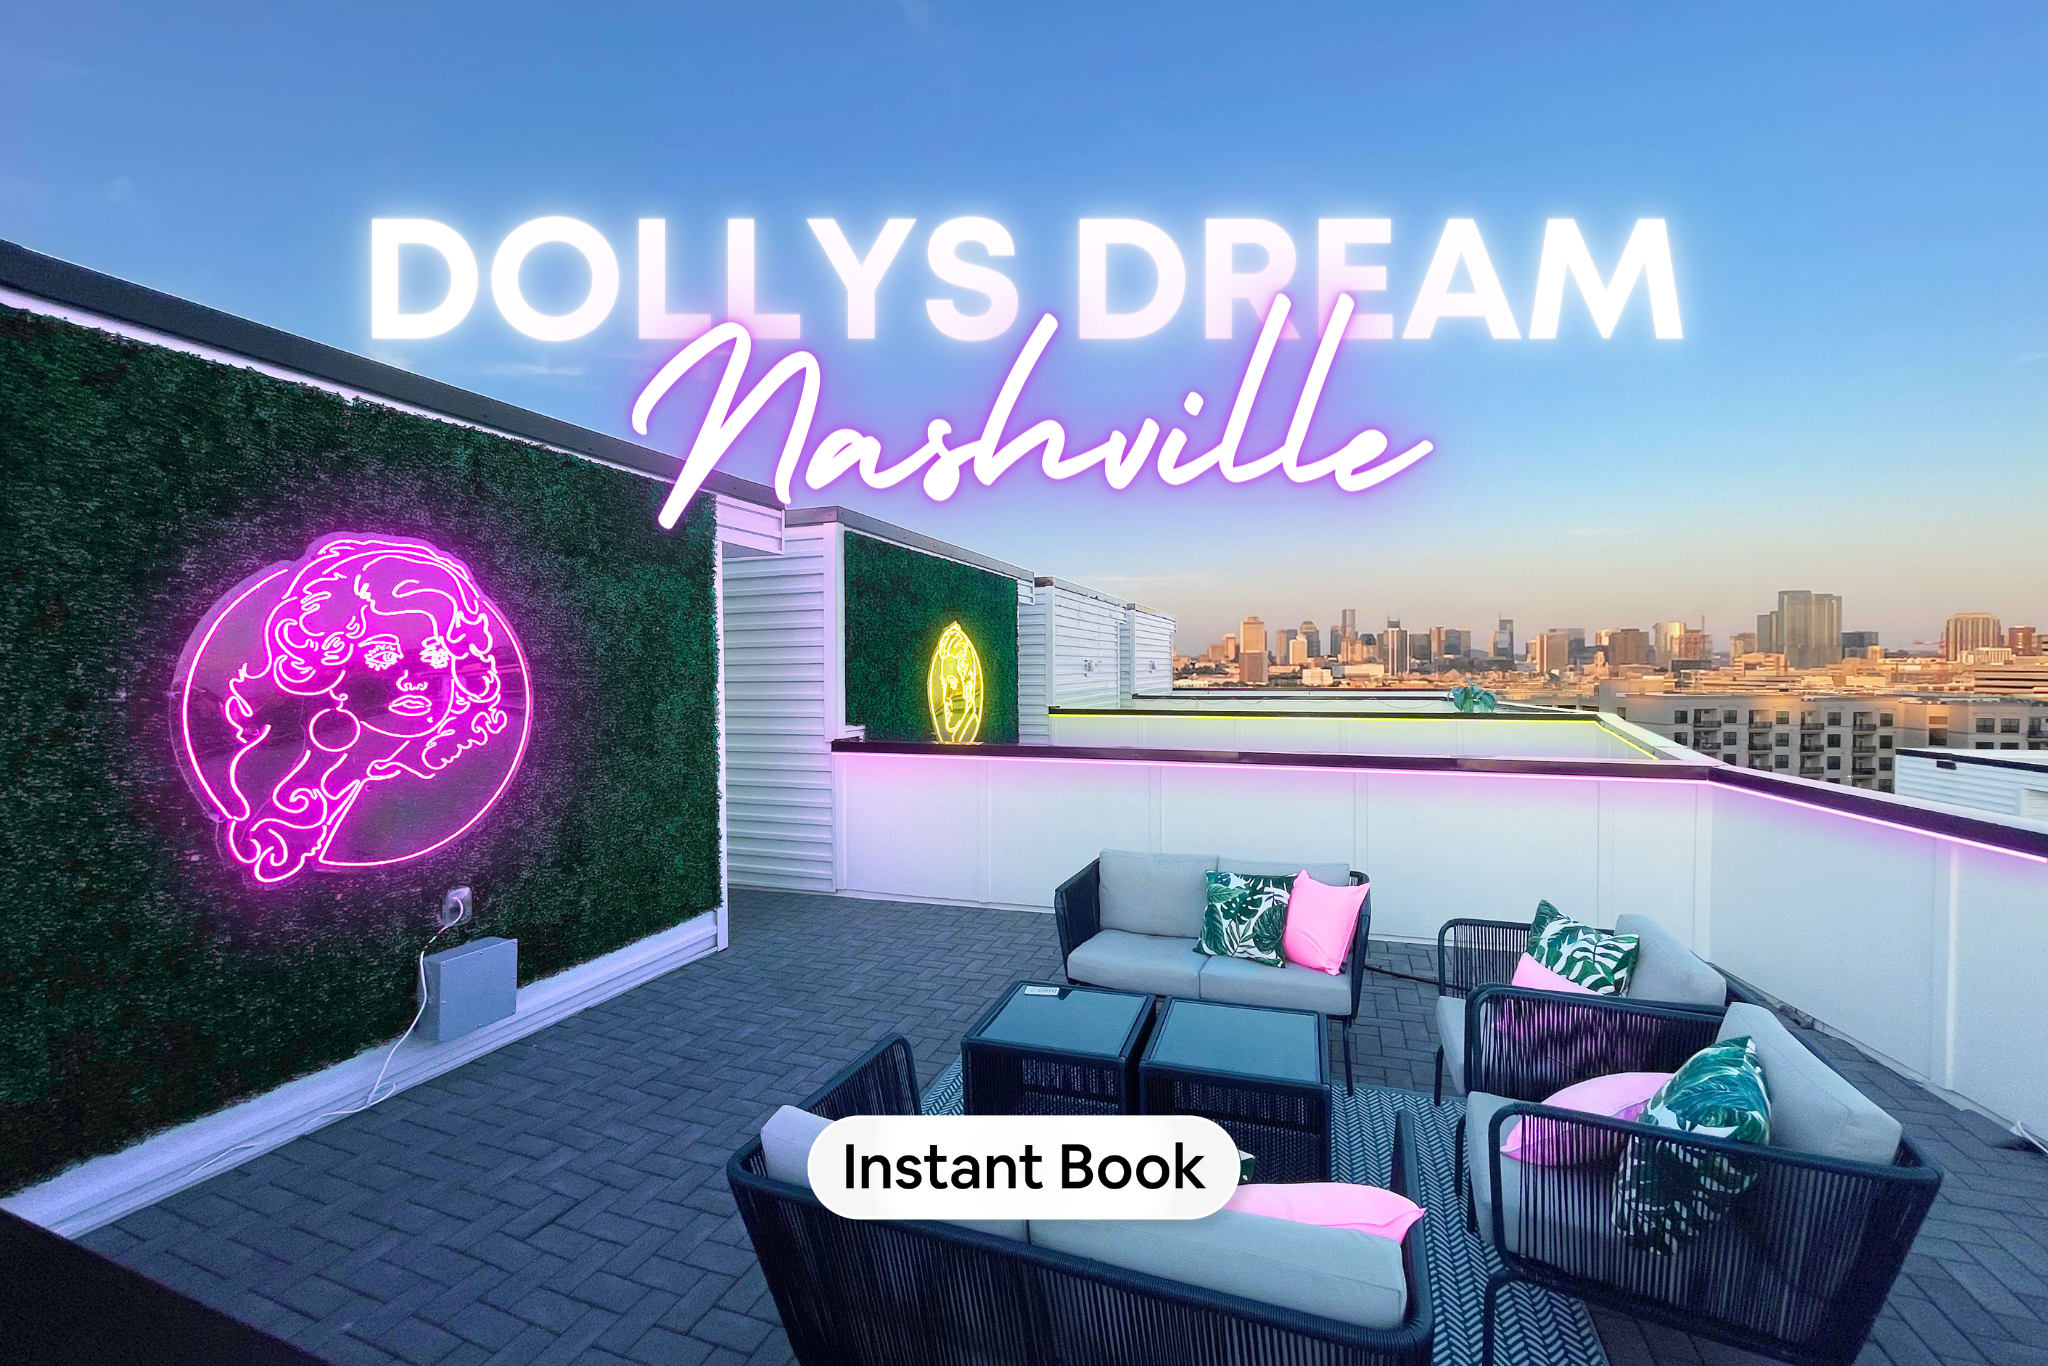 Imagine toasting to your best life on the rooftop deck of our 'Dolly's Dream' Nashville vacation rental, where bachelorette laughs, family memories, and friend group toasts sparkle under the Music City skyline. Revel in luxury as the neon glow of Dolly Parton sets the stage for a memorable getaway. 🌟 Soak in the city vibes and live the high life—book your next vacation with Misfit Homes and secure your slice of Nashville splendor! 🥂✨